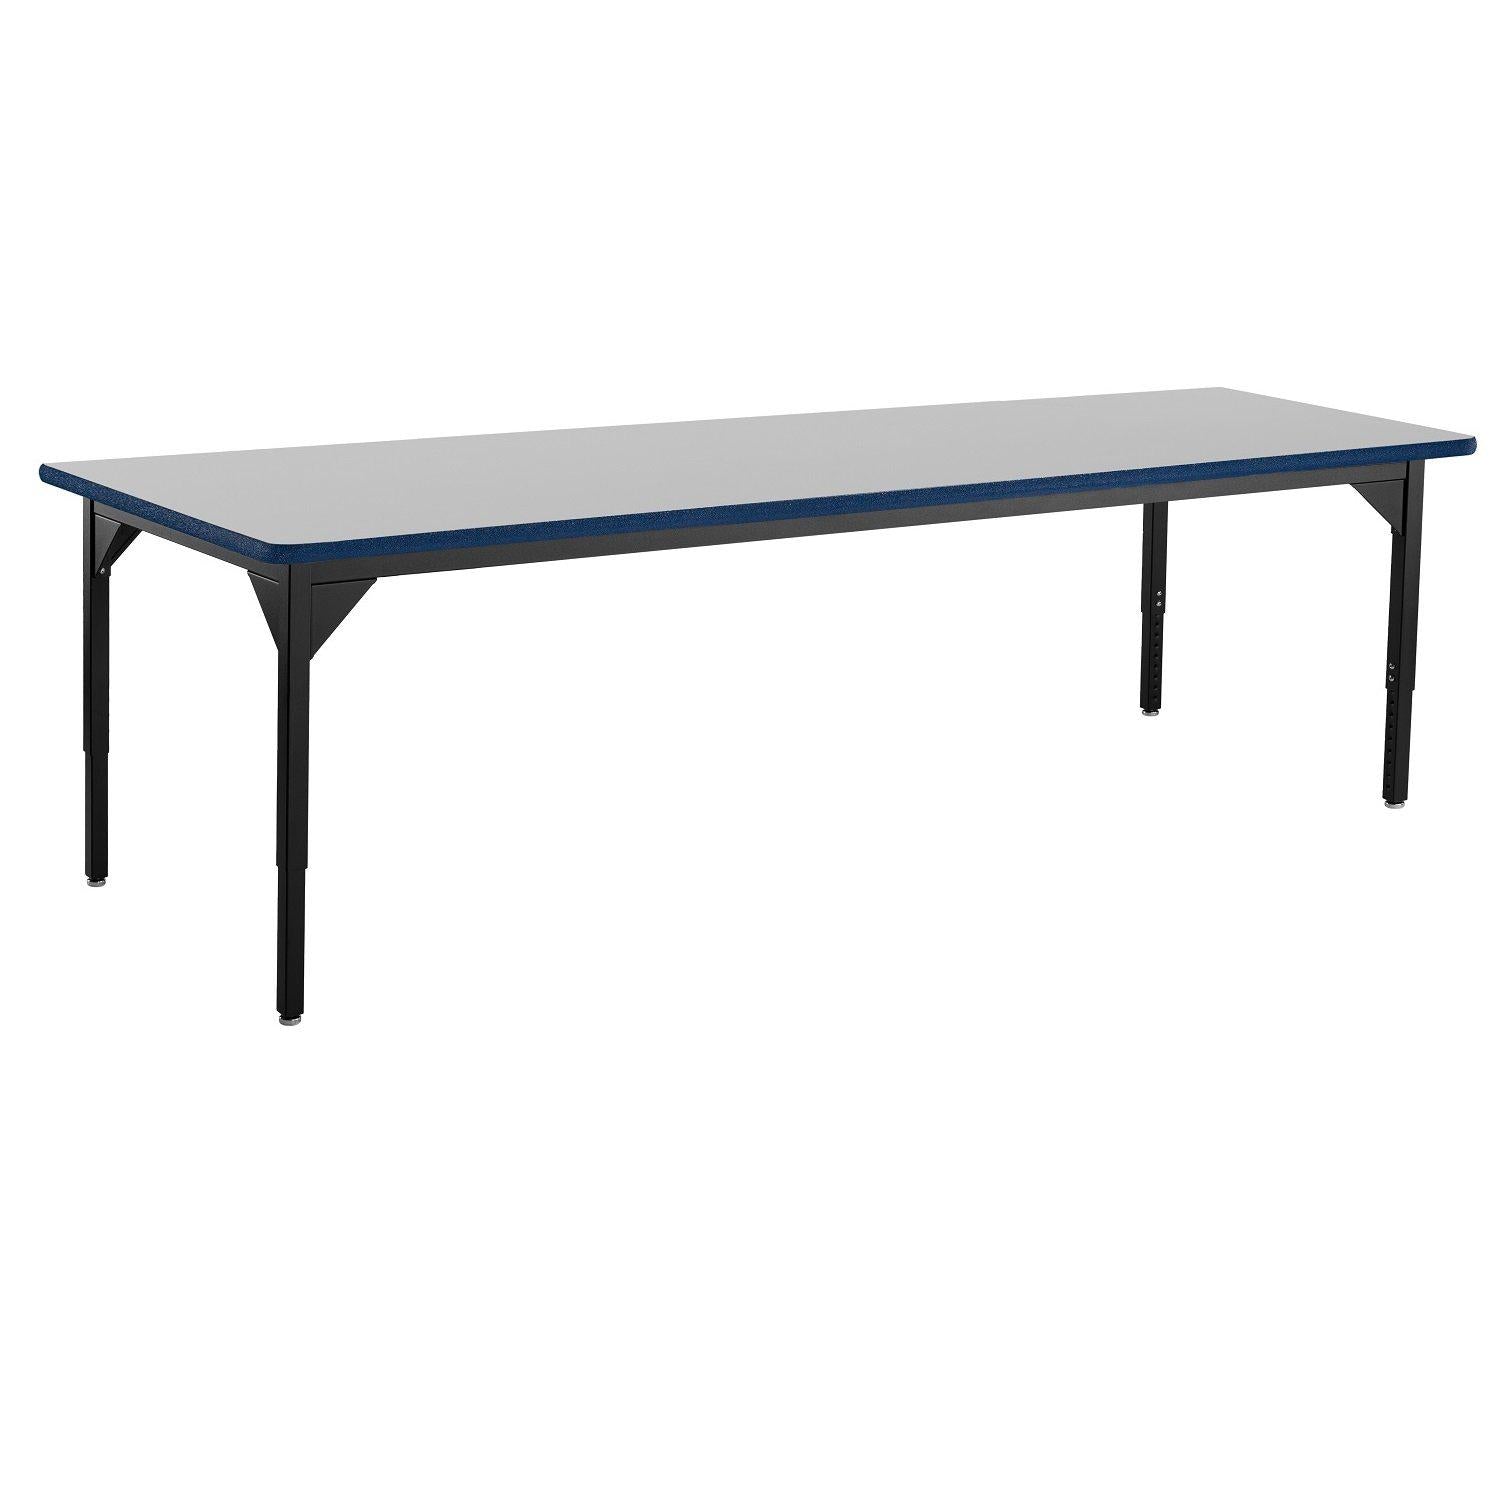 Heavy-Duty Height-Adjustable Utility Table, Black Frame, 42" x 72", Supreme High-Pressure Laminate Top with Black ProtectEdge